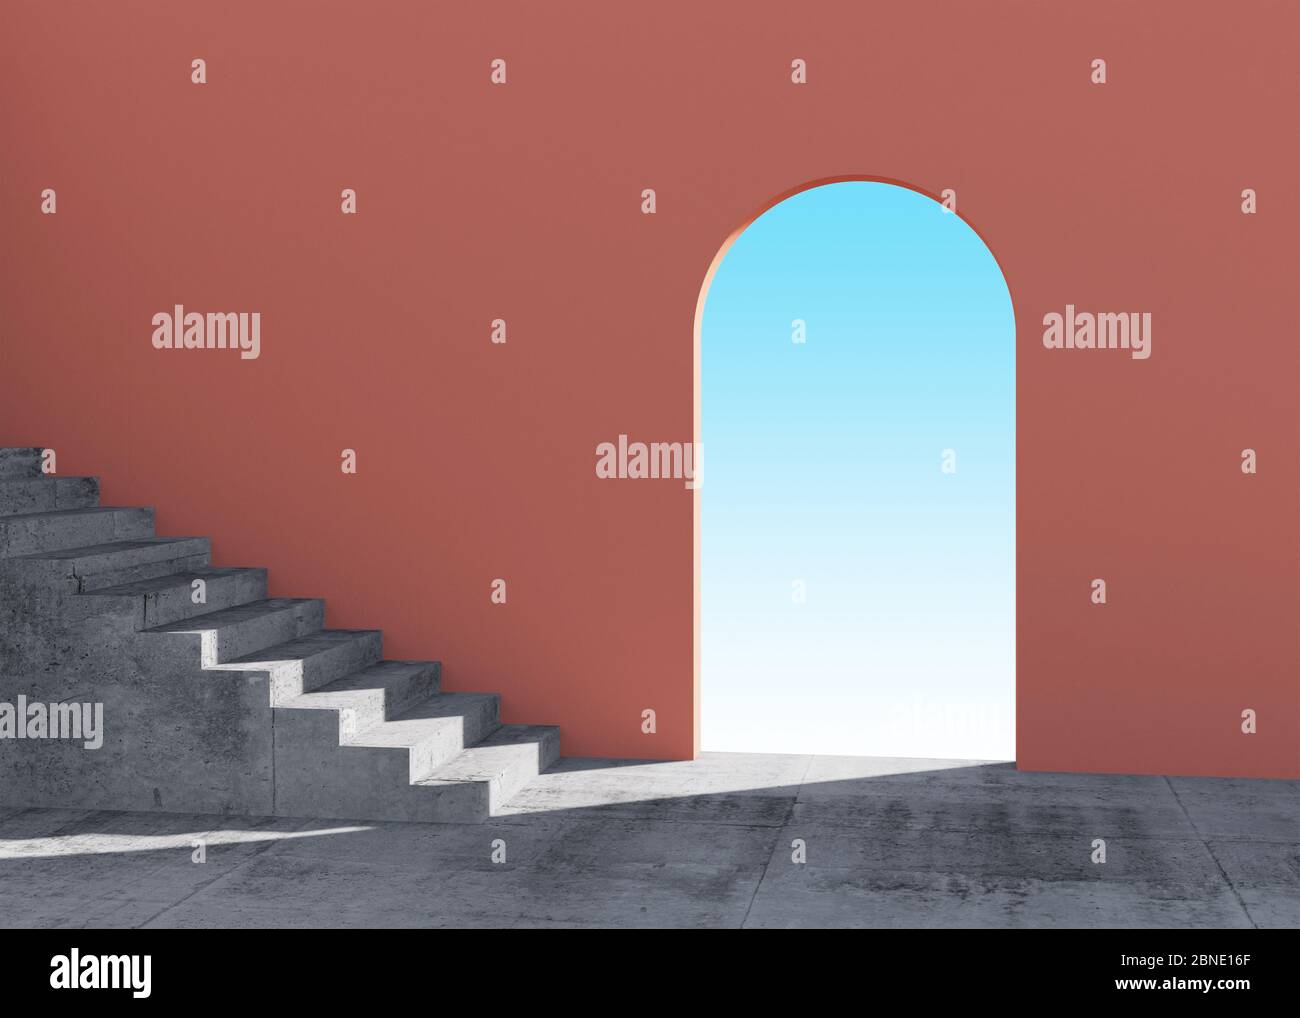 Abstract interior with concrete stairway and empty arch in red wall with blue sky behind, 3d rendering illustration Stock Photo